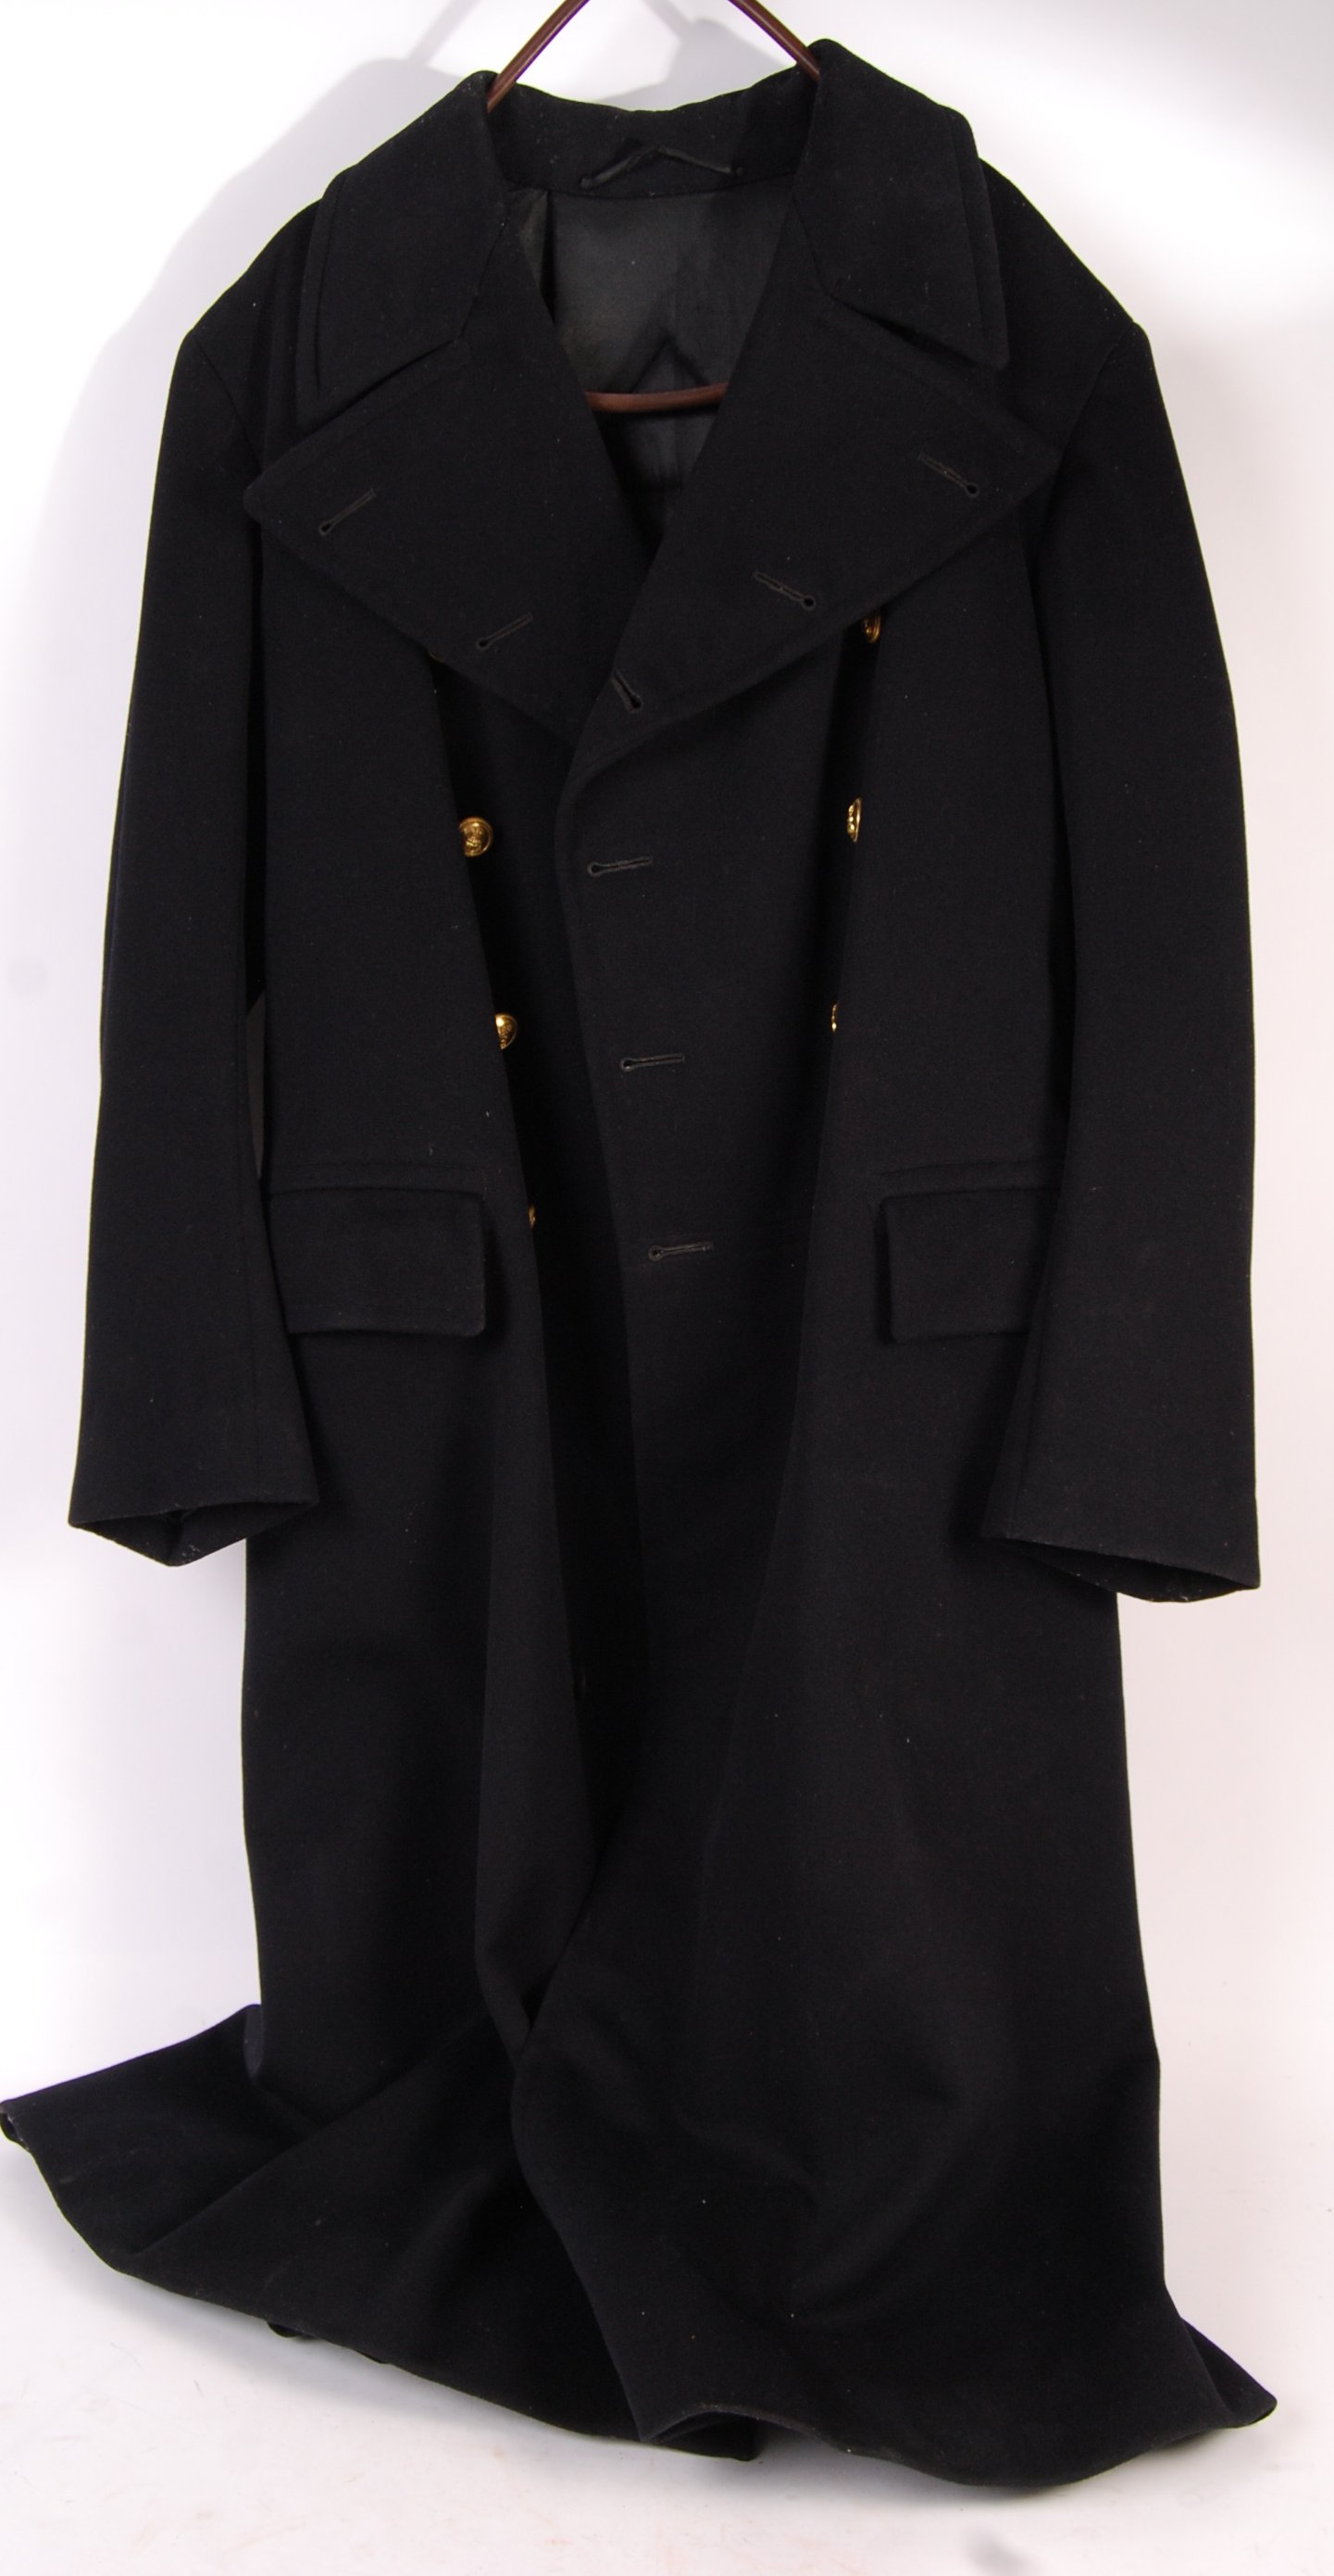 POST-WWII SECOND WORLD WAR NAVAL GREATCOAT